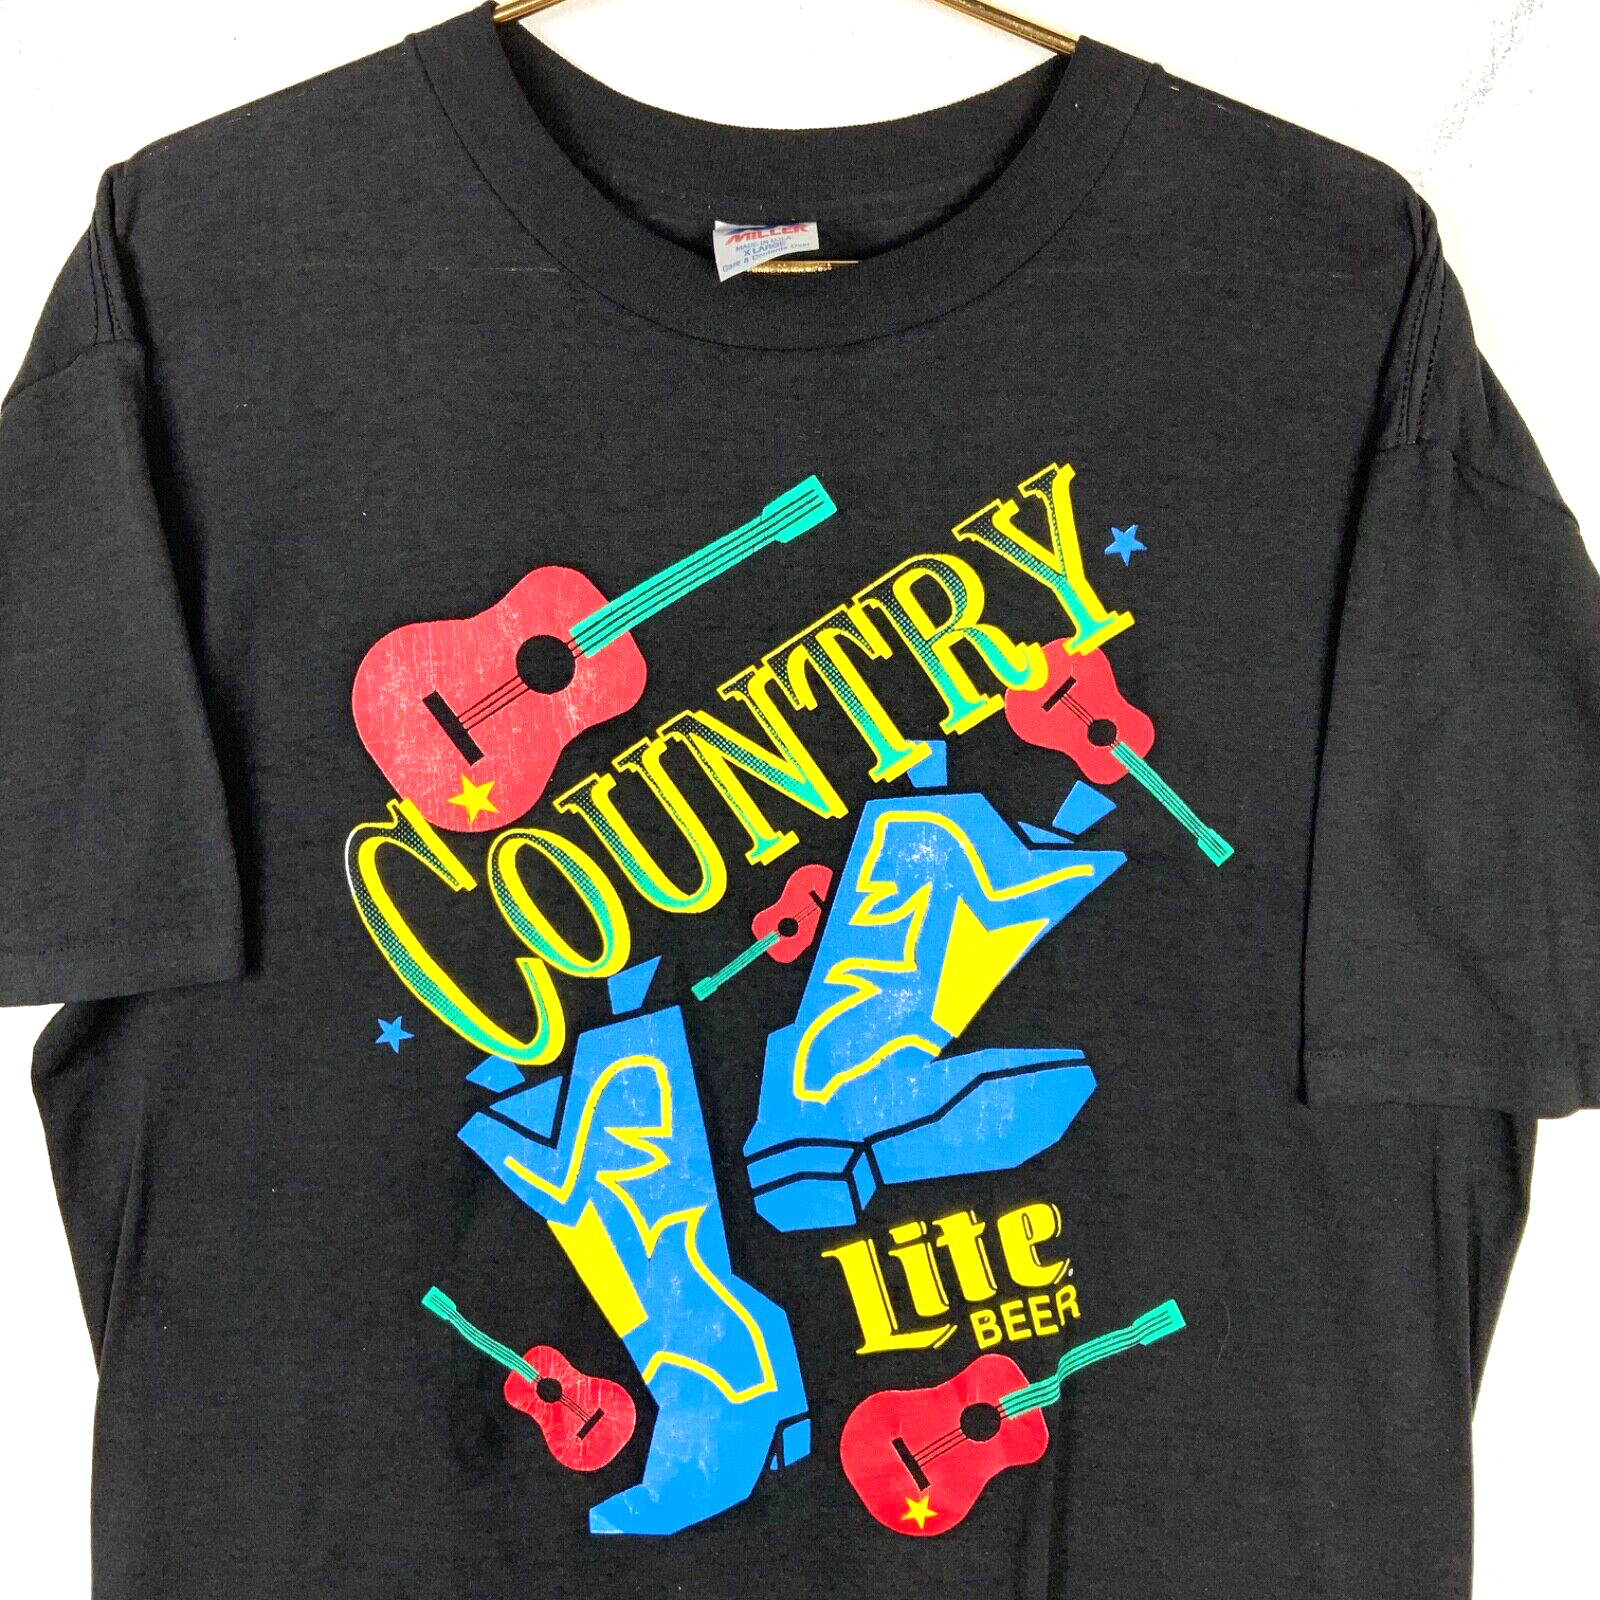 Vintage Miller Lite Beer Country Music T-Shirt Size XL Black Single Stitch 80s